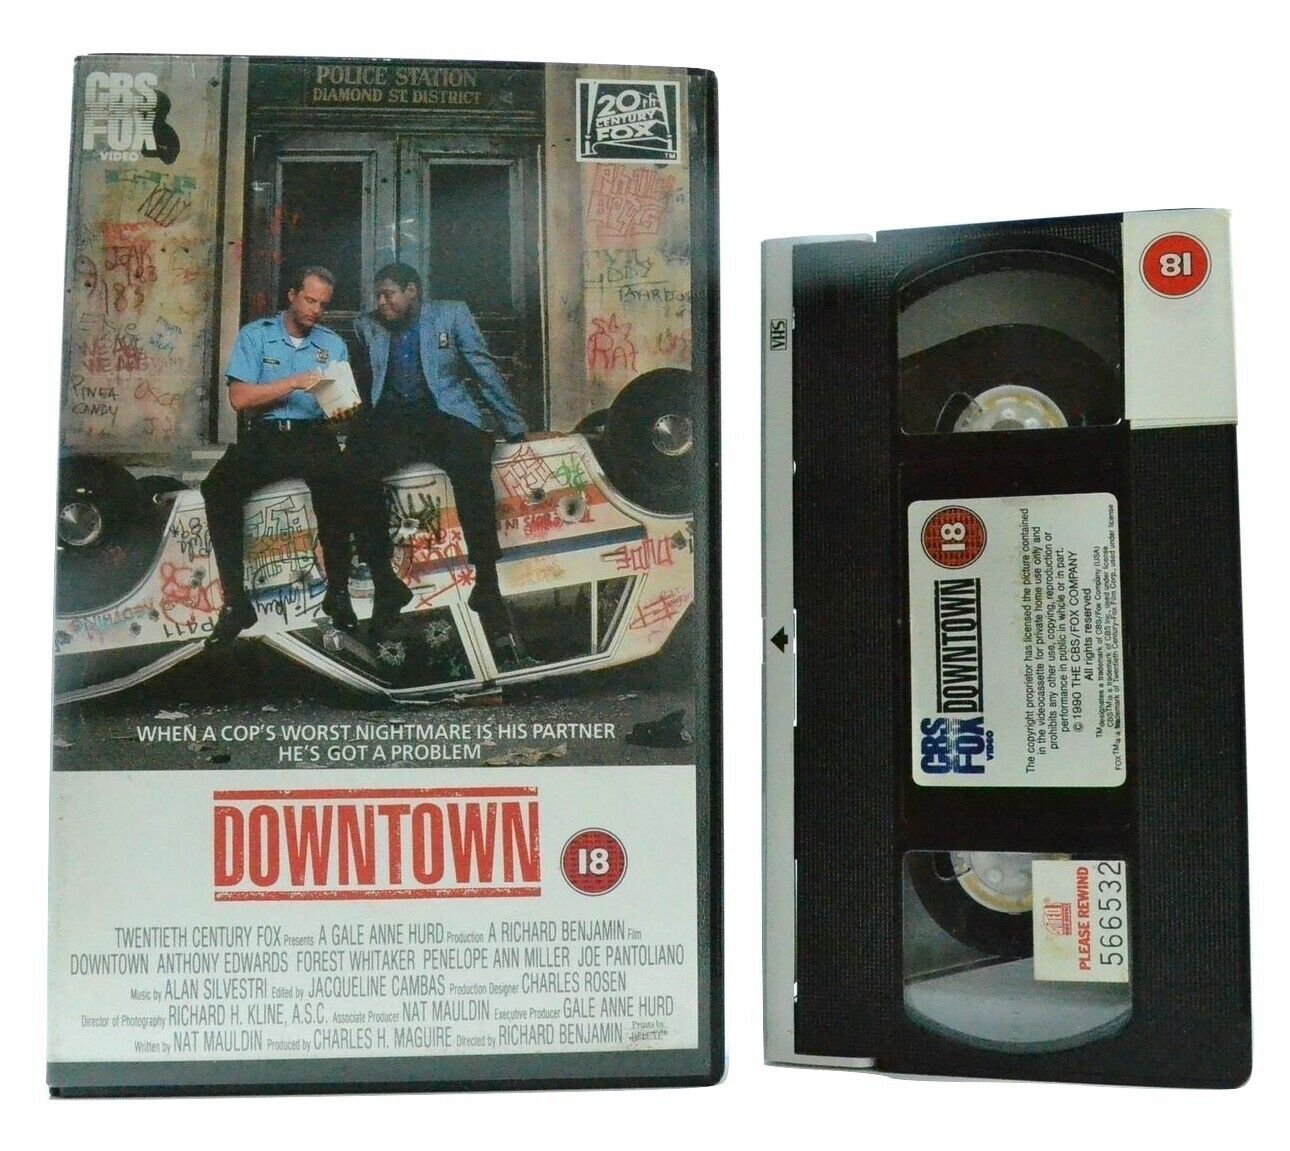 Downtown: CBS/FOX (1990) - Action/Comedy - Large Box - Forest Whitaker - Pal VHS-